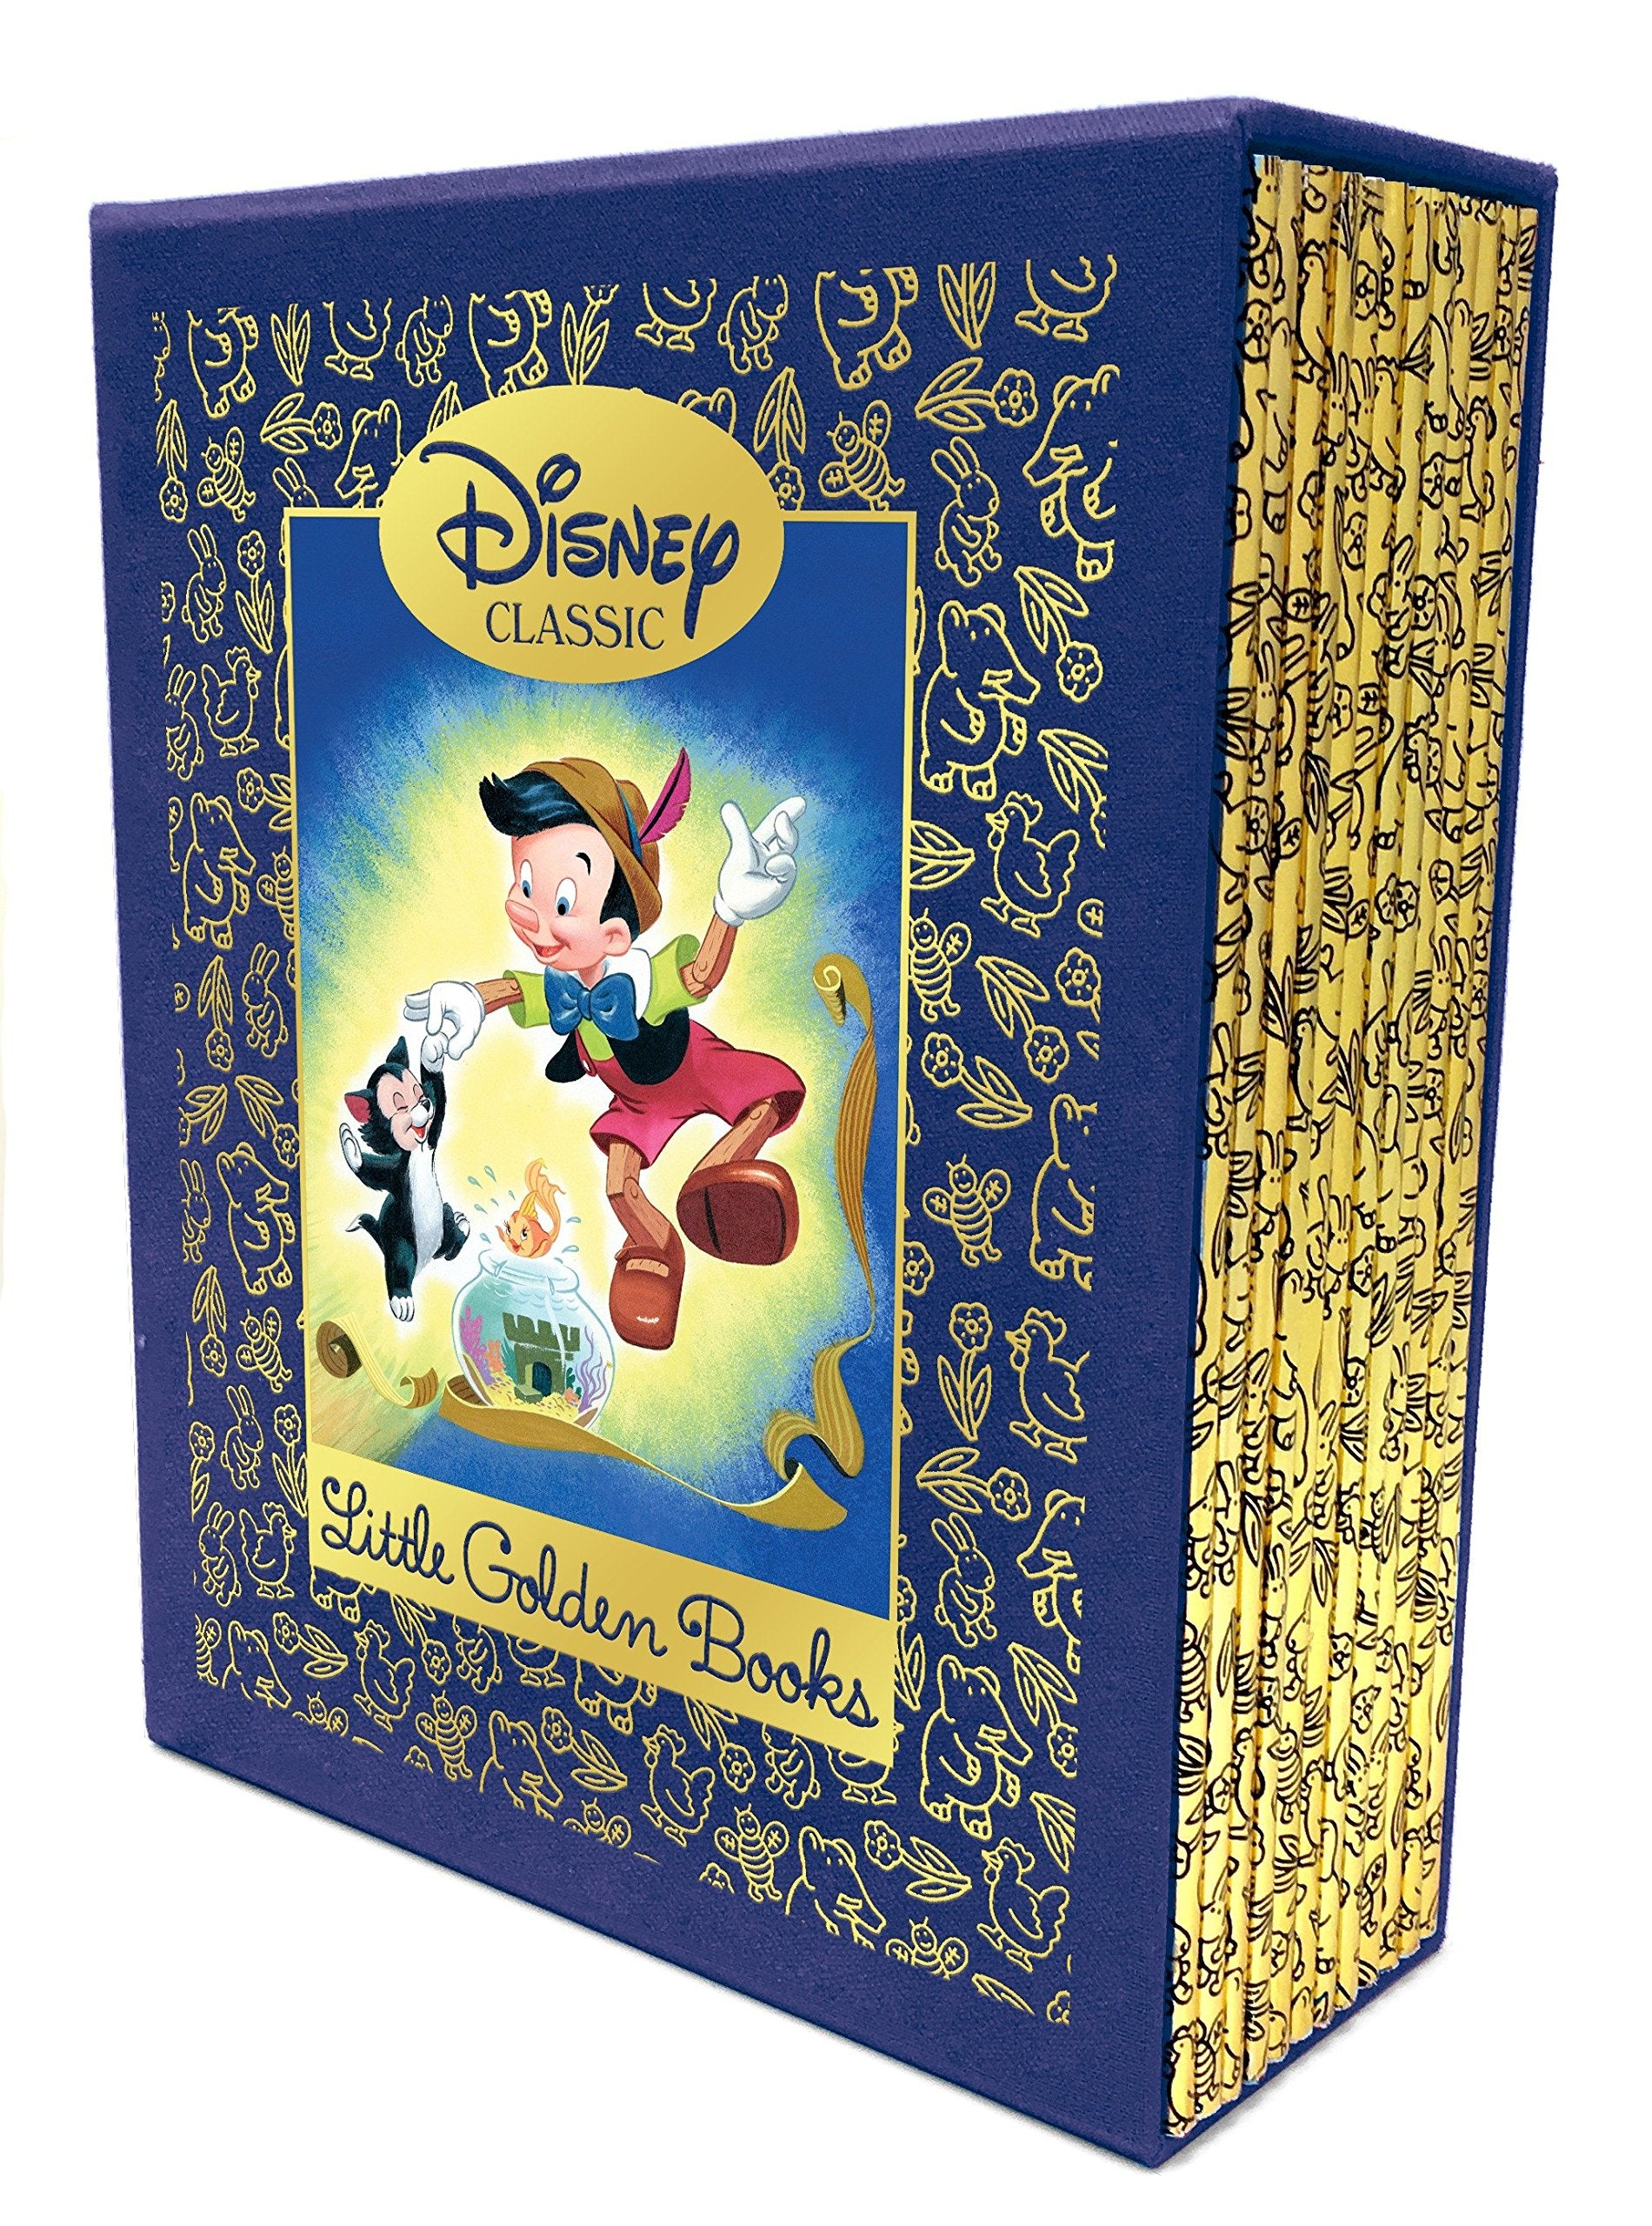 12 Beloved Disney Classic Little Golden Books (Disney Classic) by Various